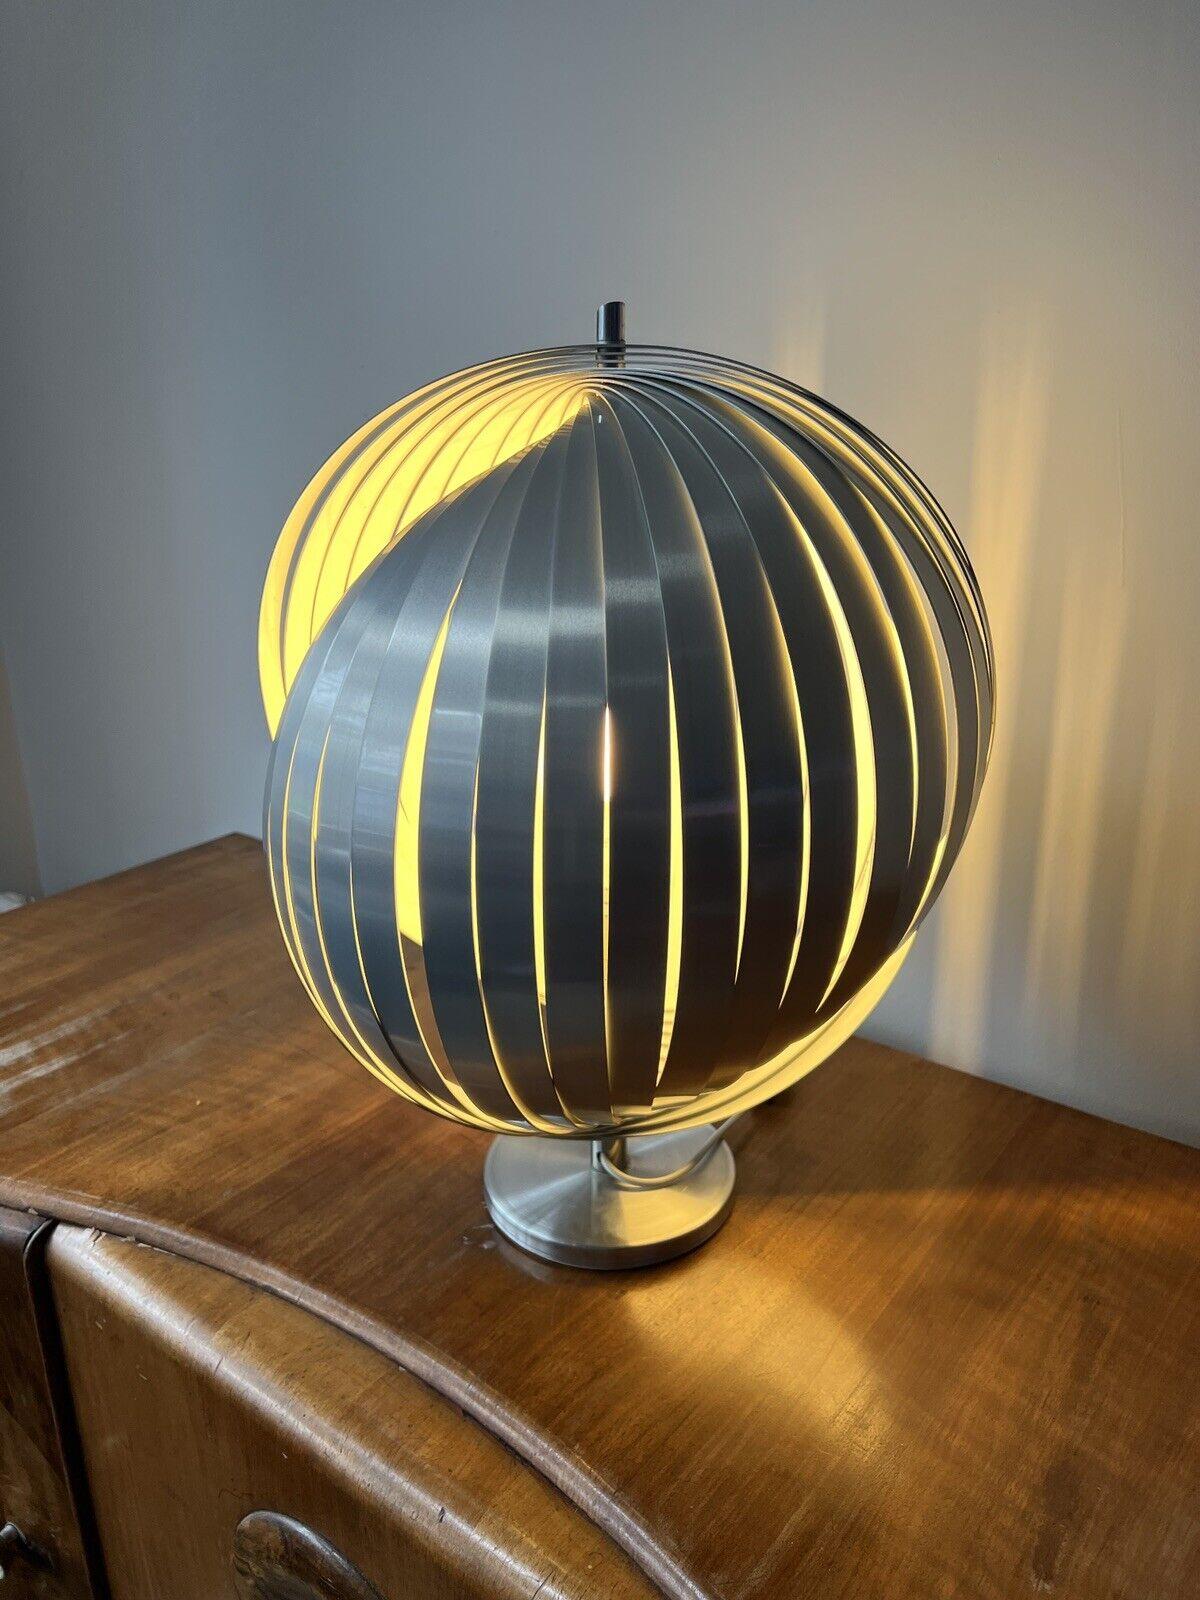 Henri Mathieu Original 1970s Moon Lamp, Polished Steel In Good Condition For Sale In Bishop's Stortford, GB